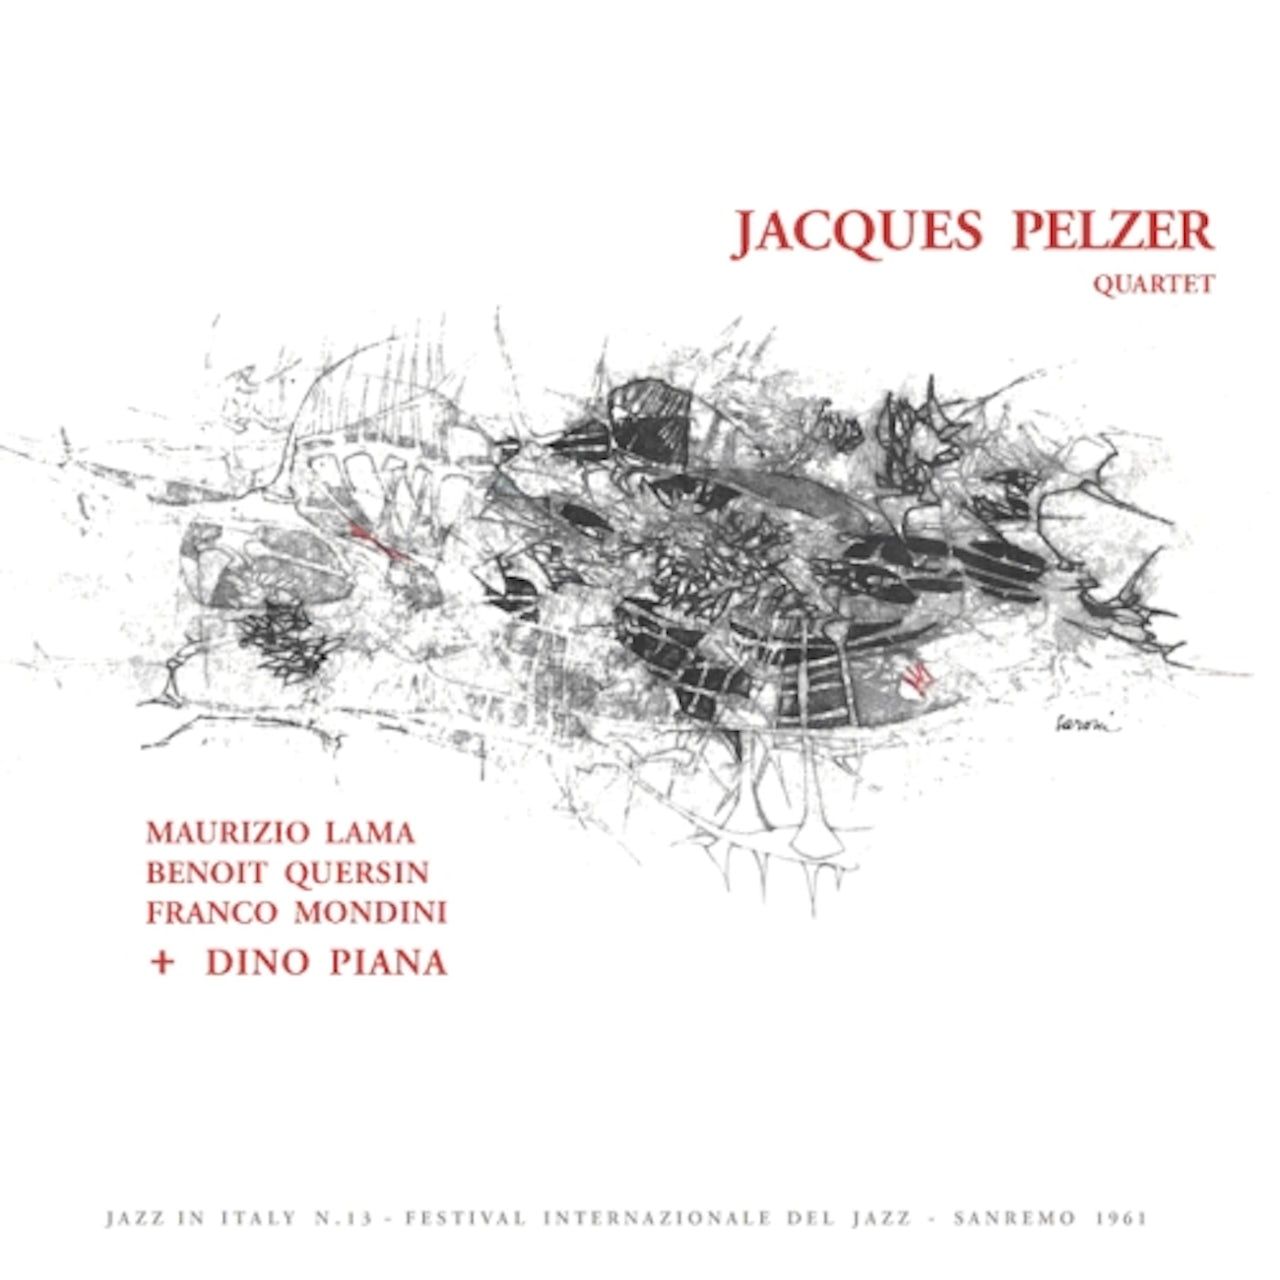 8018344121345, Виниловая пластинка Jacques, Pelzer, Quartet wax ruby i m not as well as i thought i was